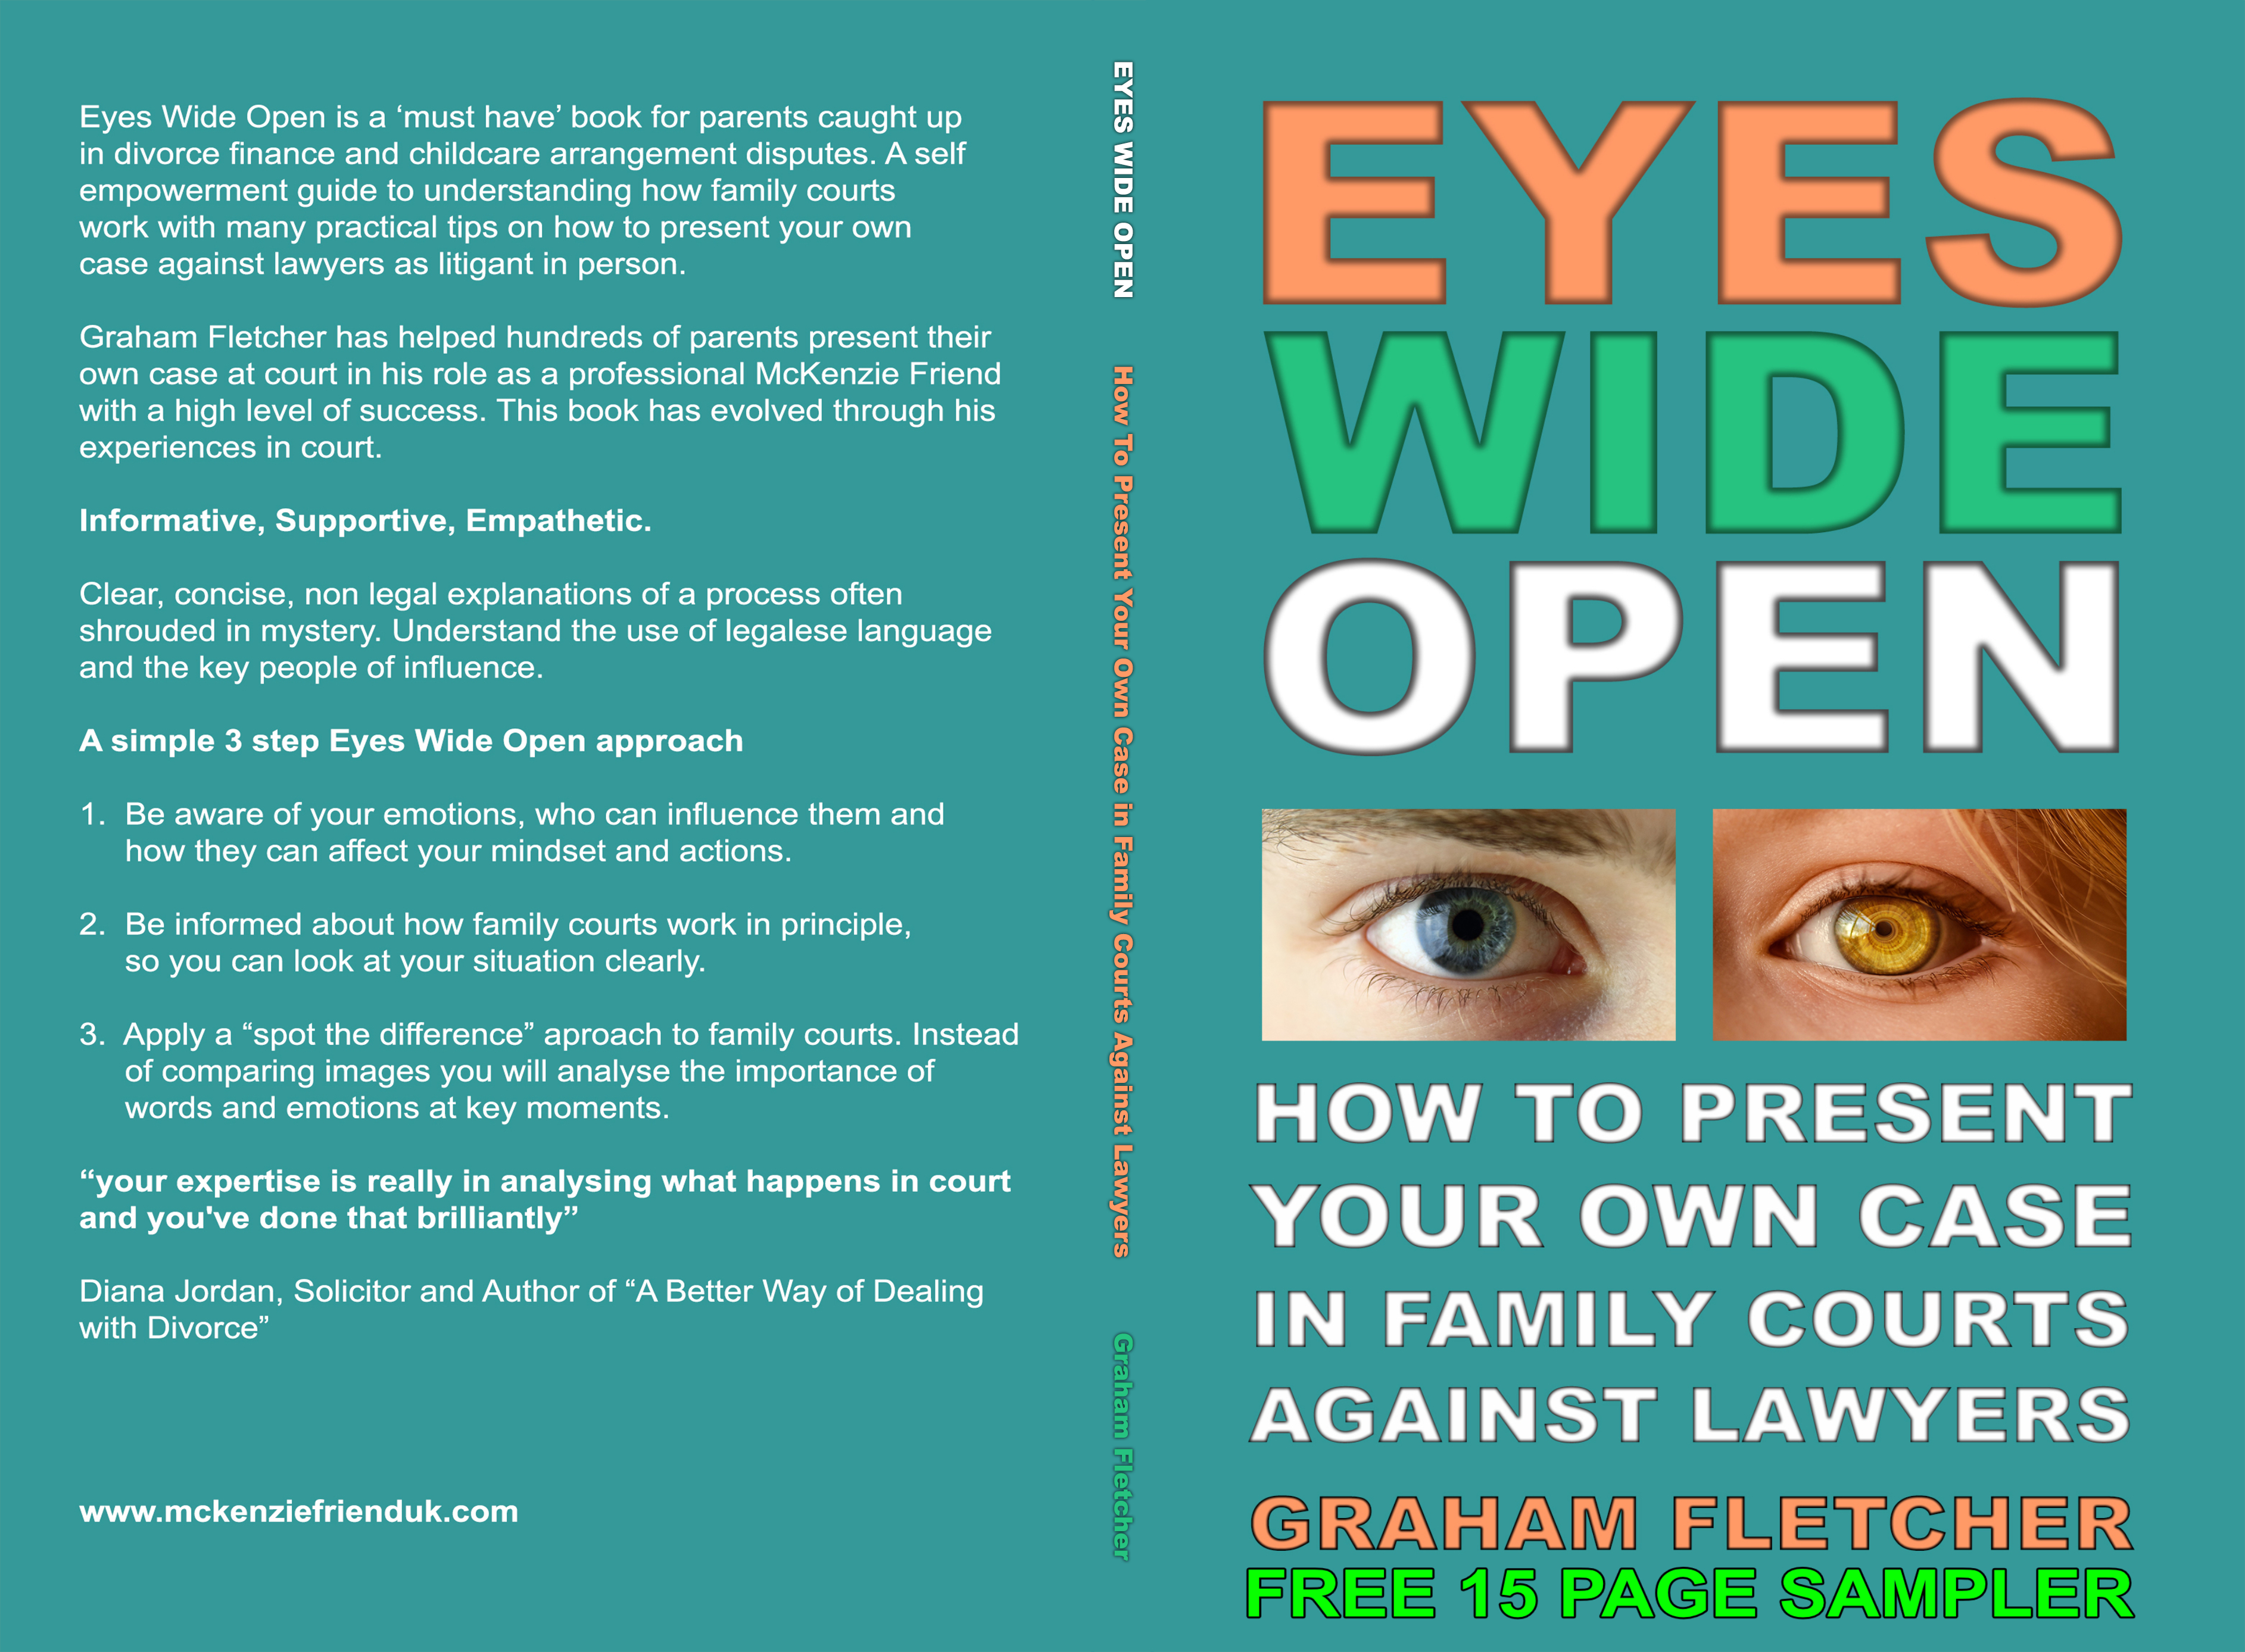 front cover of the free sampler pdf book by graham fletcher mckenzie friend called 'eyes wide open'